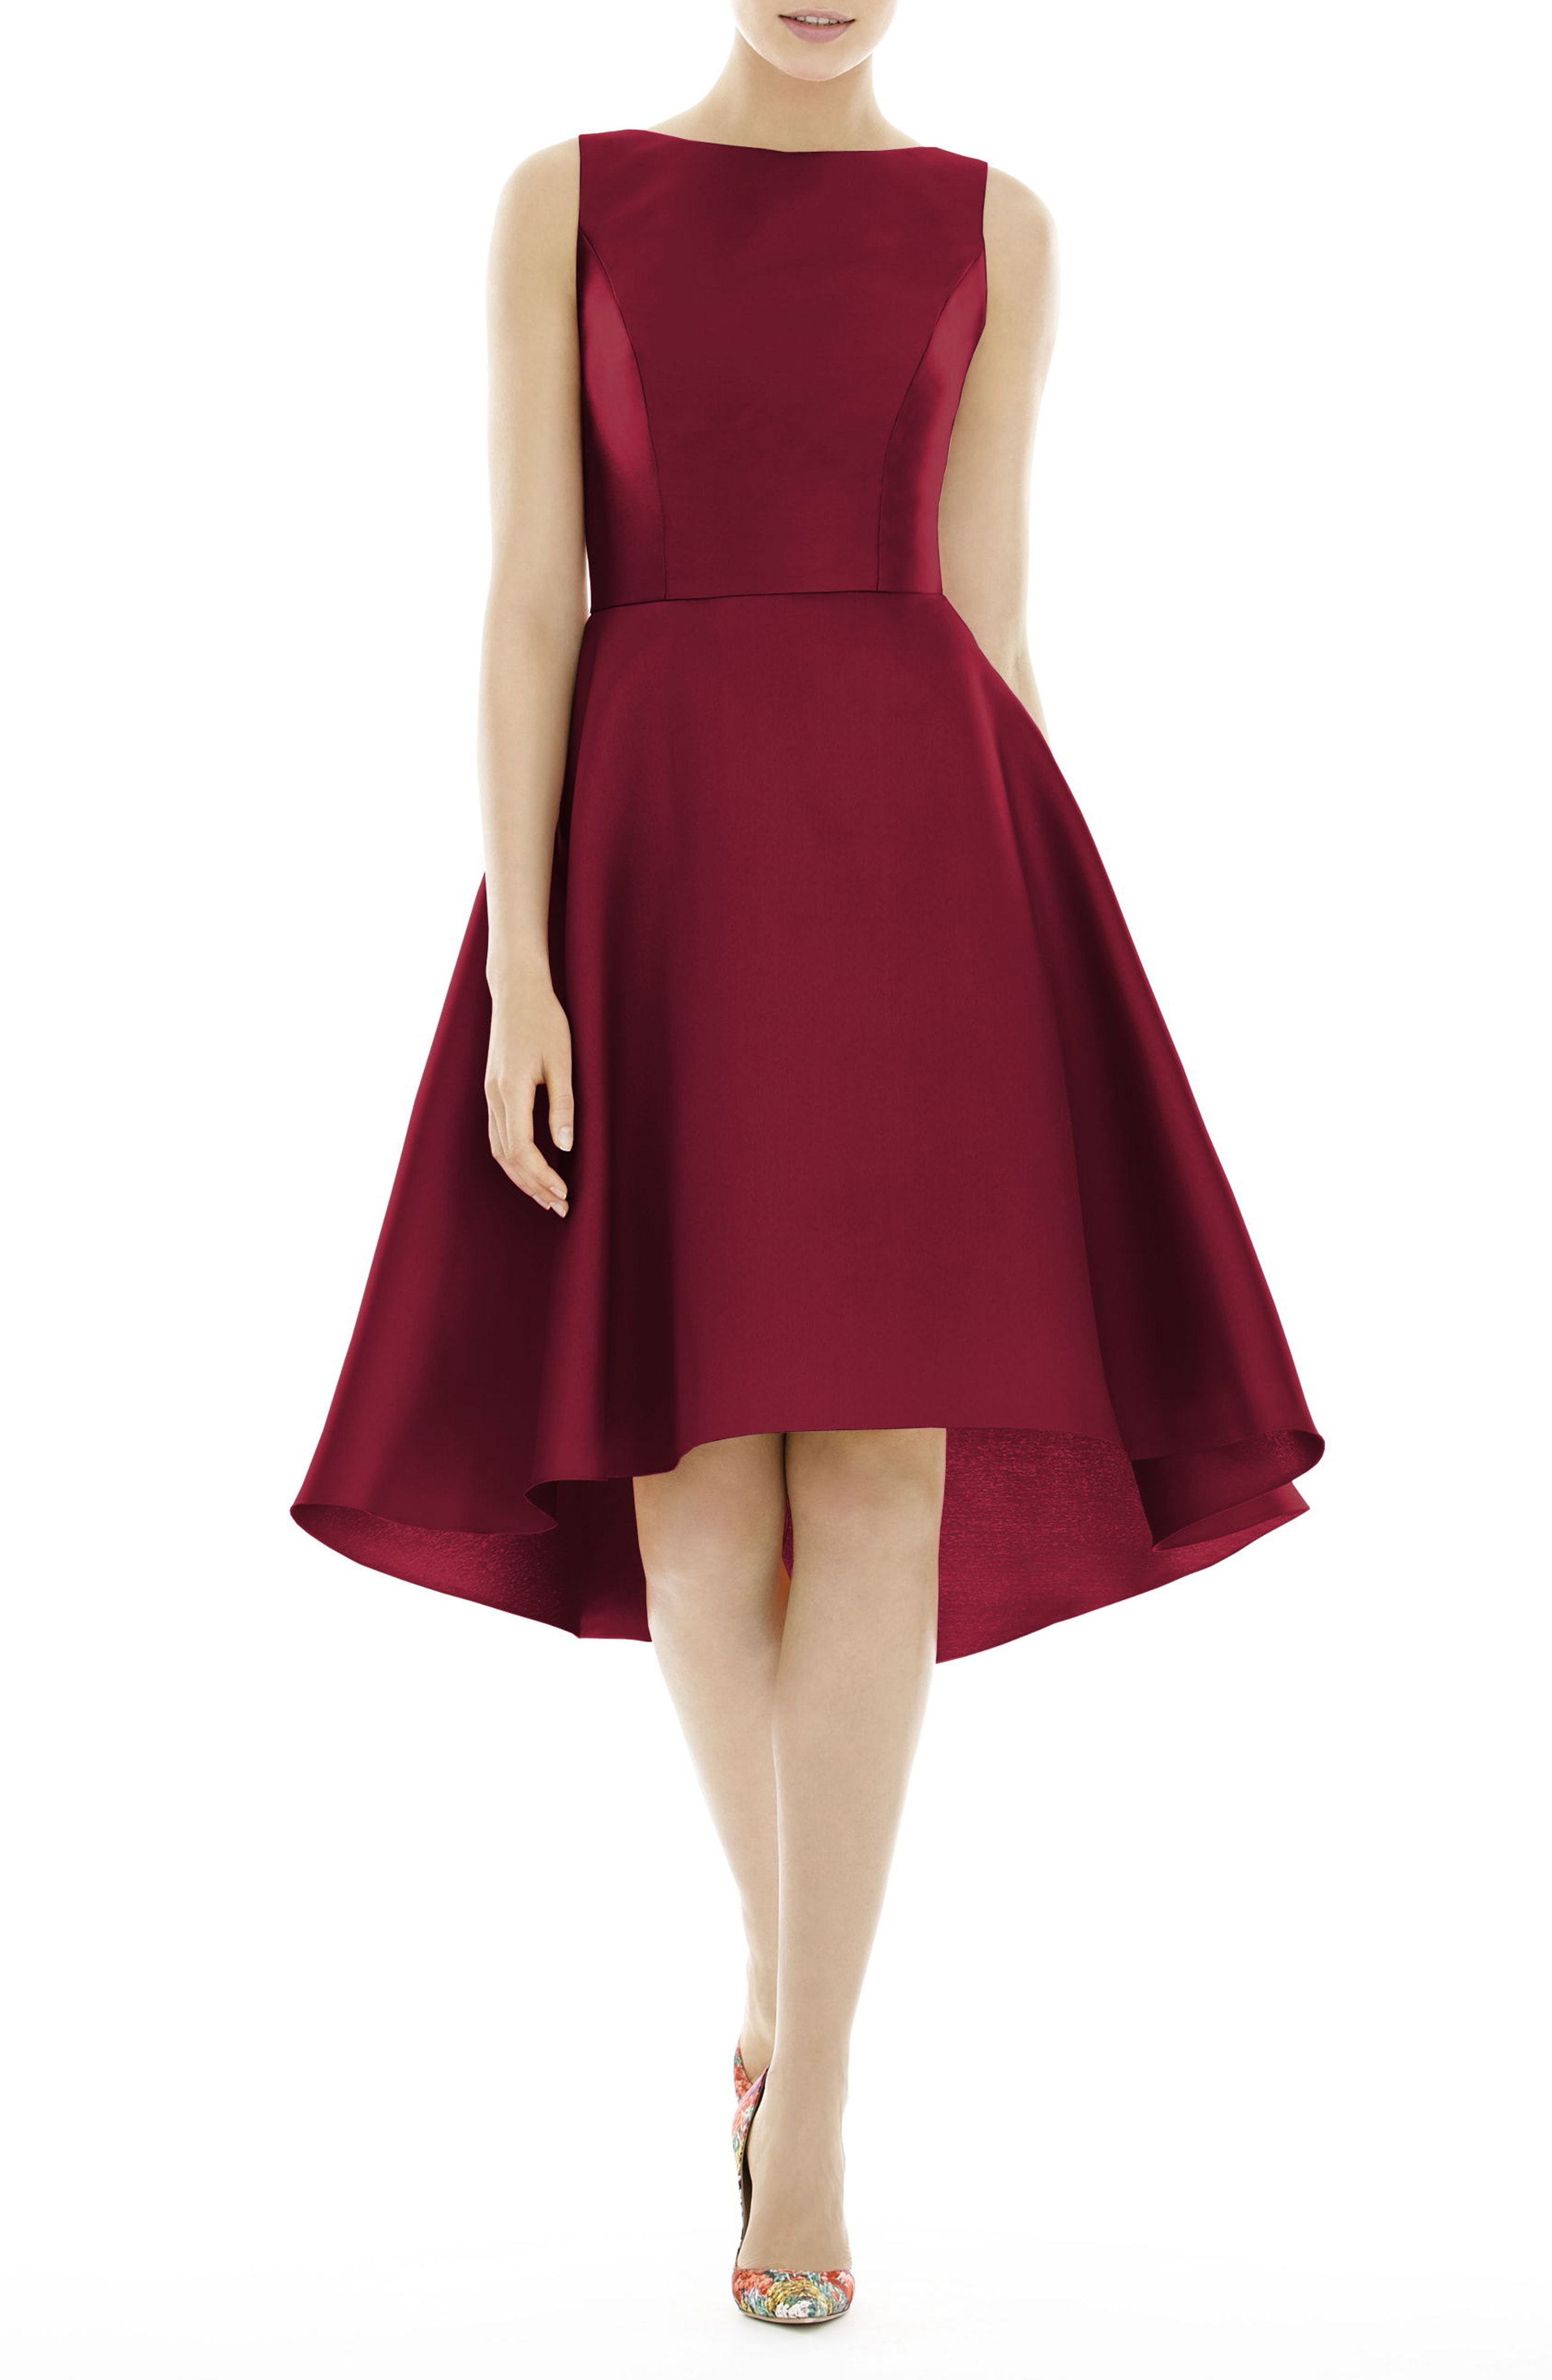 Women's Cocktail & Party Dresses | Nordstrom